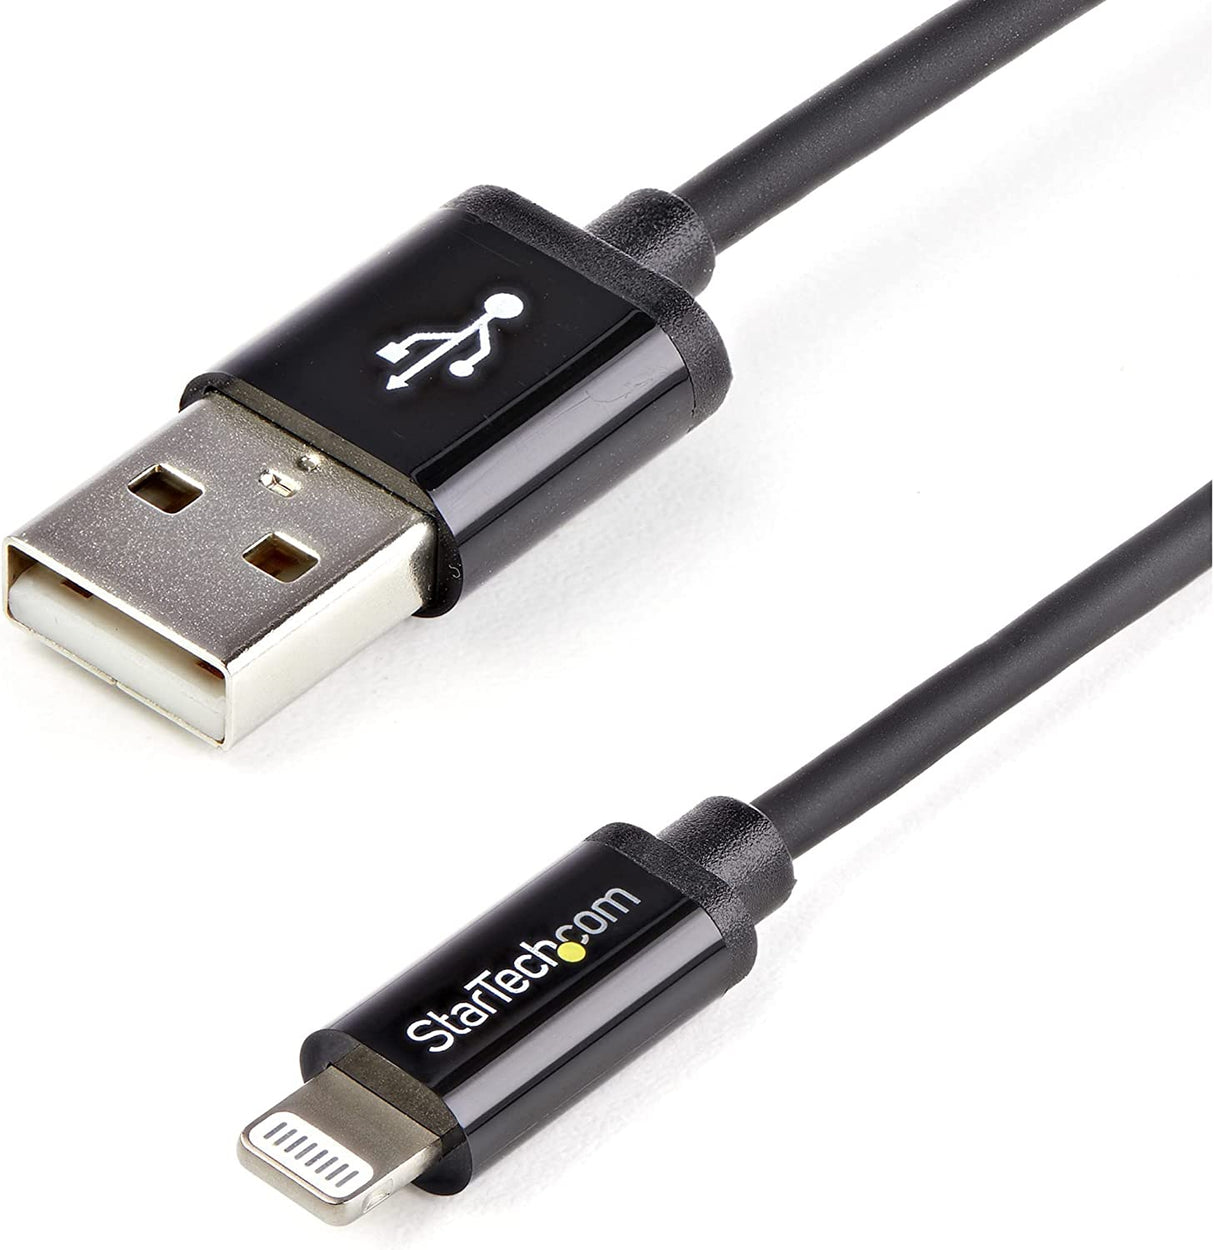 StarTech.com 2m (6ft) Long Black Apple 8-pin Lightning Connector to USB Cable for iPhone / iPod / iPad - Charge and Sync Cable (USBLT2MB) 6ft Black